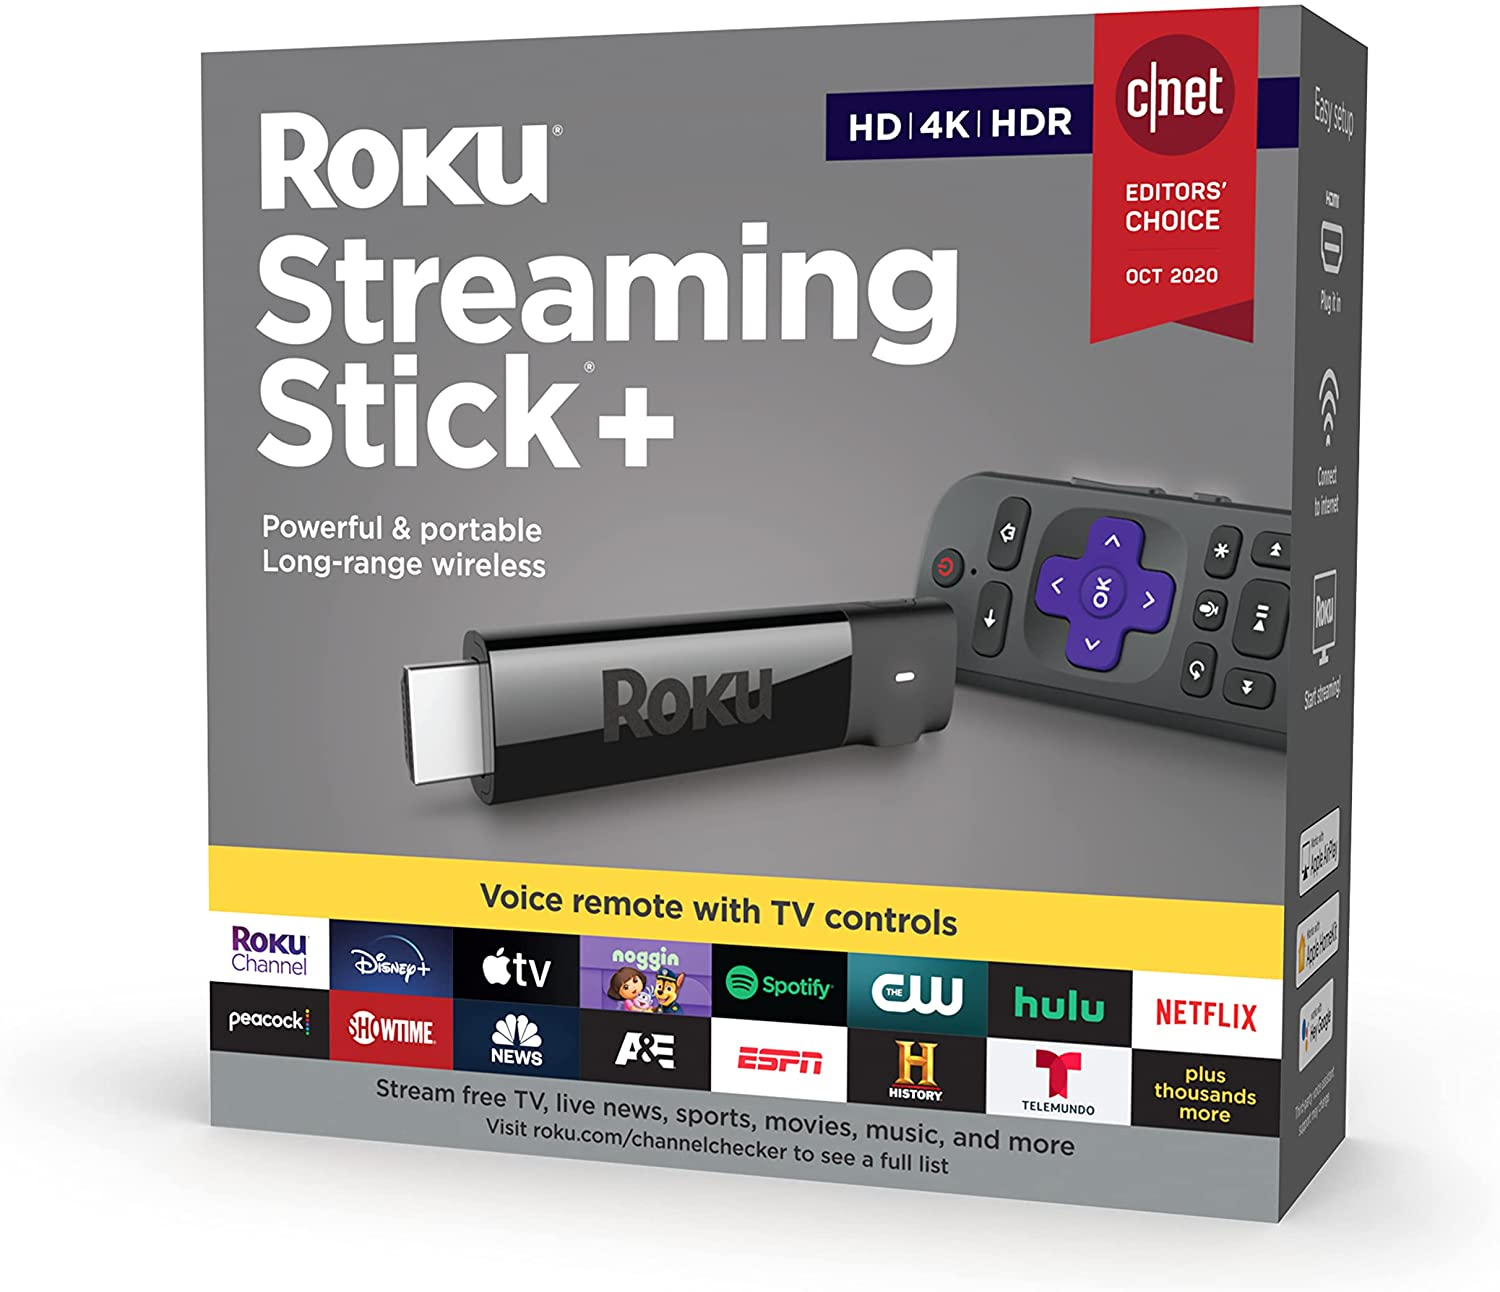 Amazon.com: Roku Streaming Stick+ | HD/4K/HDR Streaming Device with Long-range Wireless and Roku Voice Remote with TV Controls $29